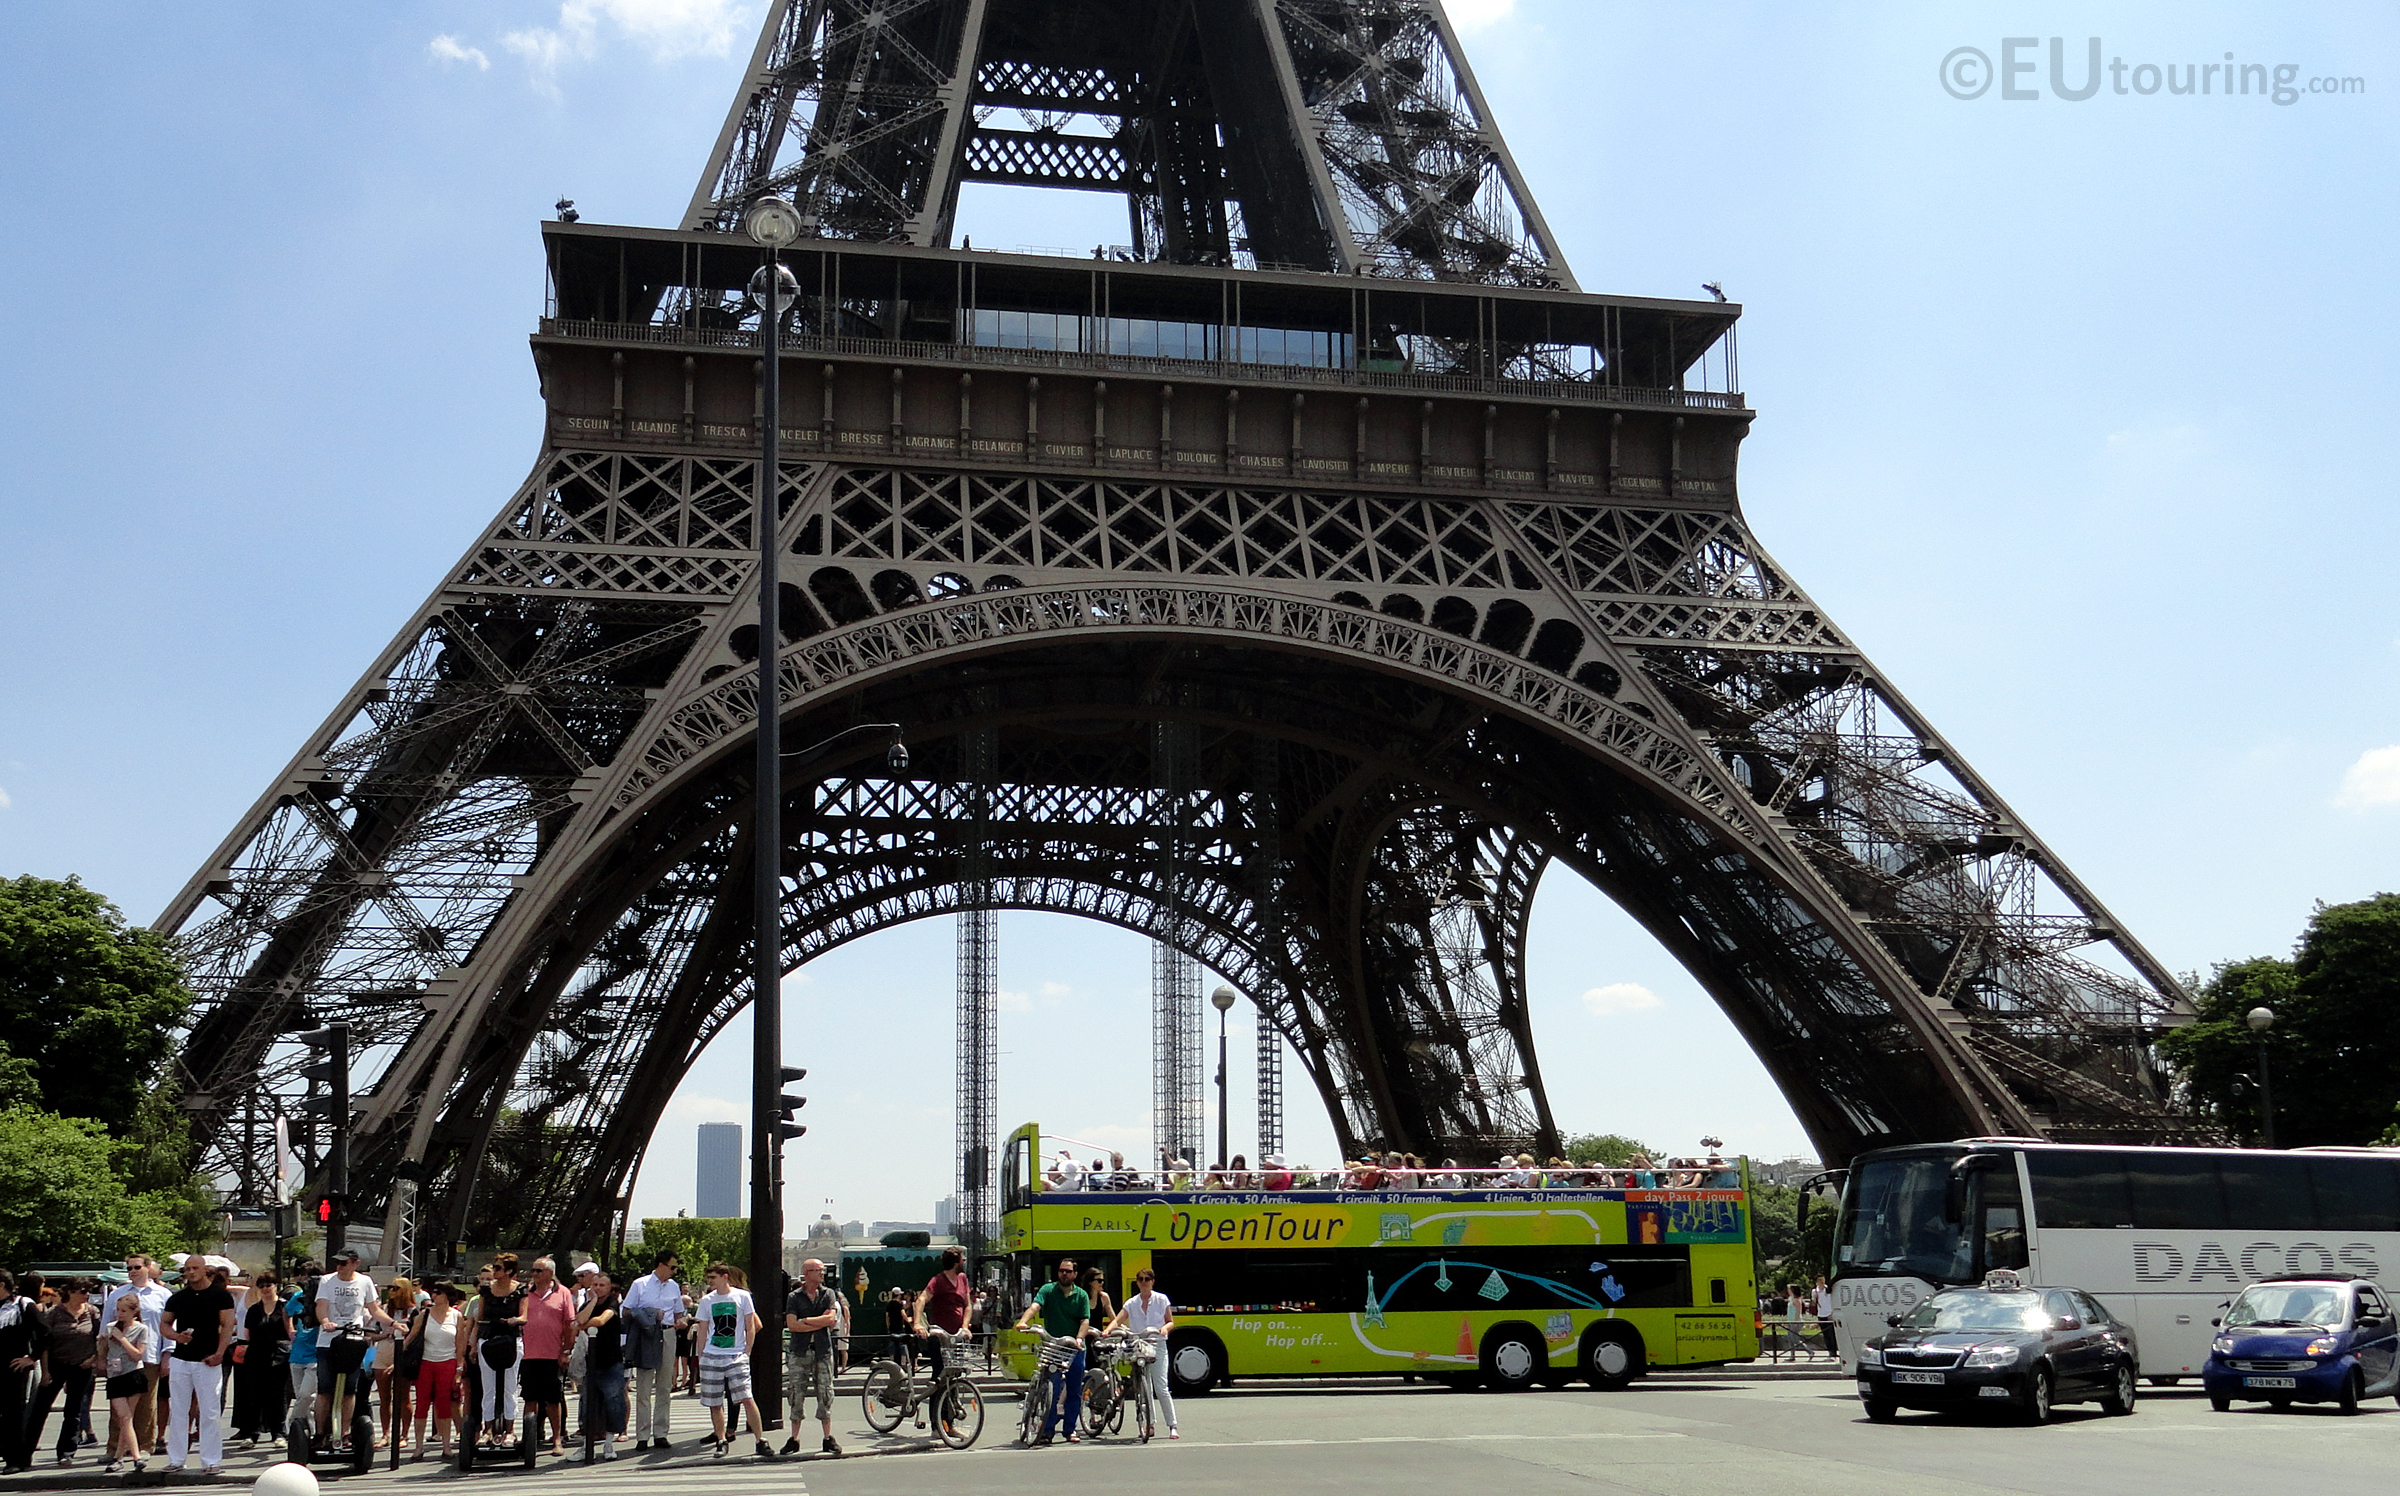 l'OpenTour bus in front of the Eiffel Tower